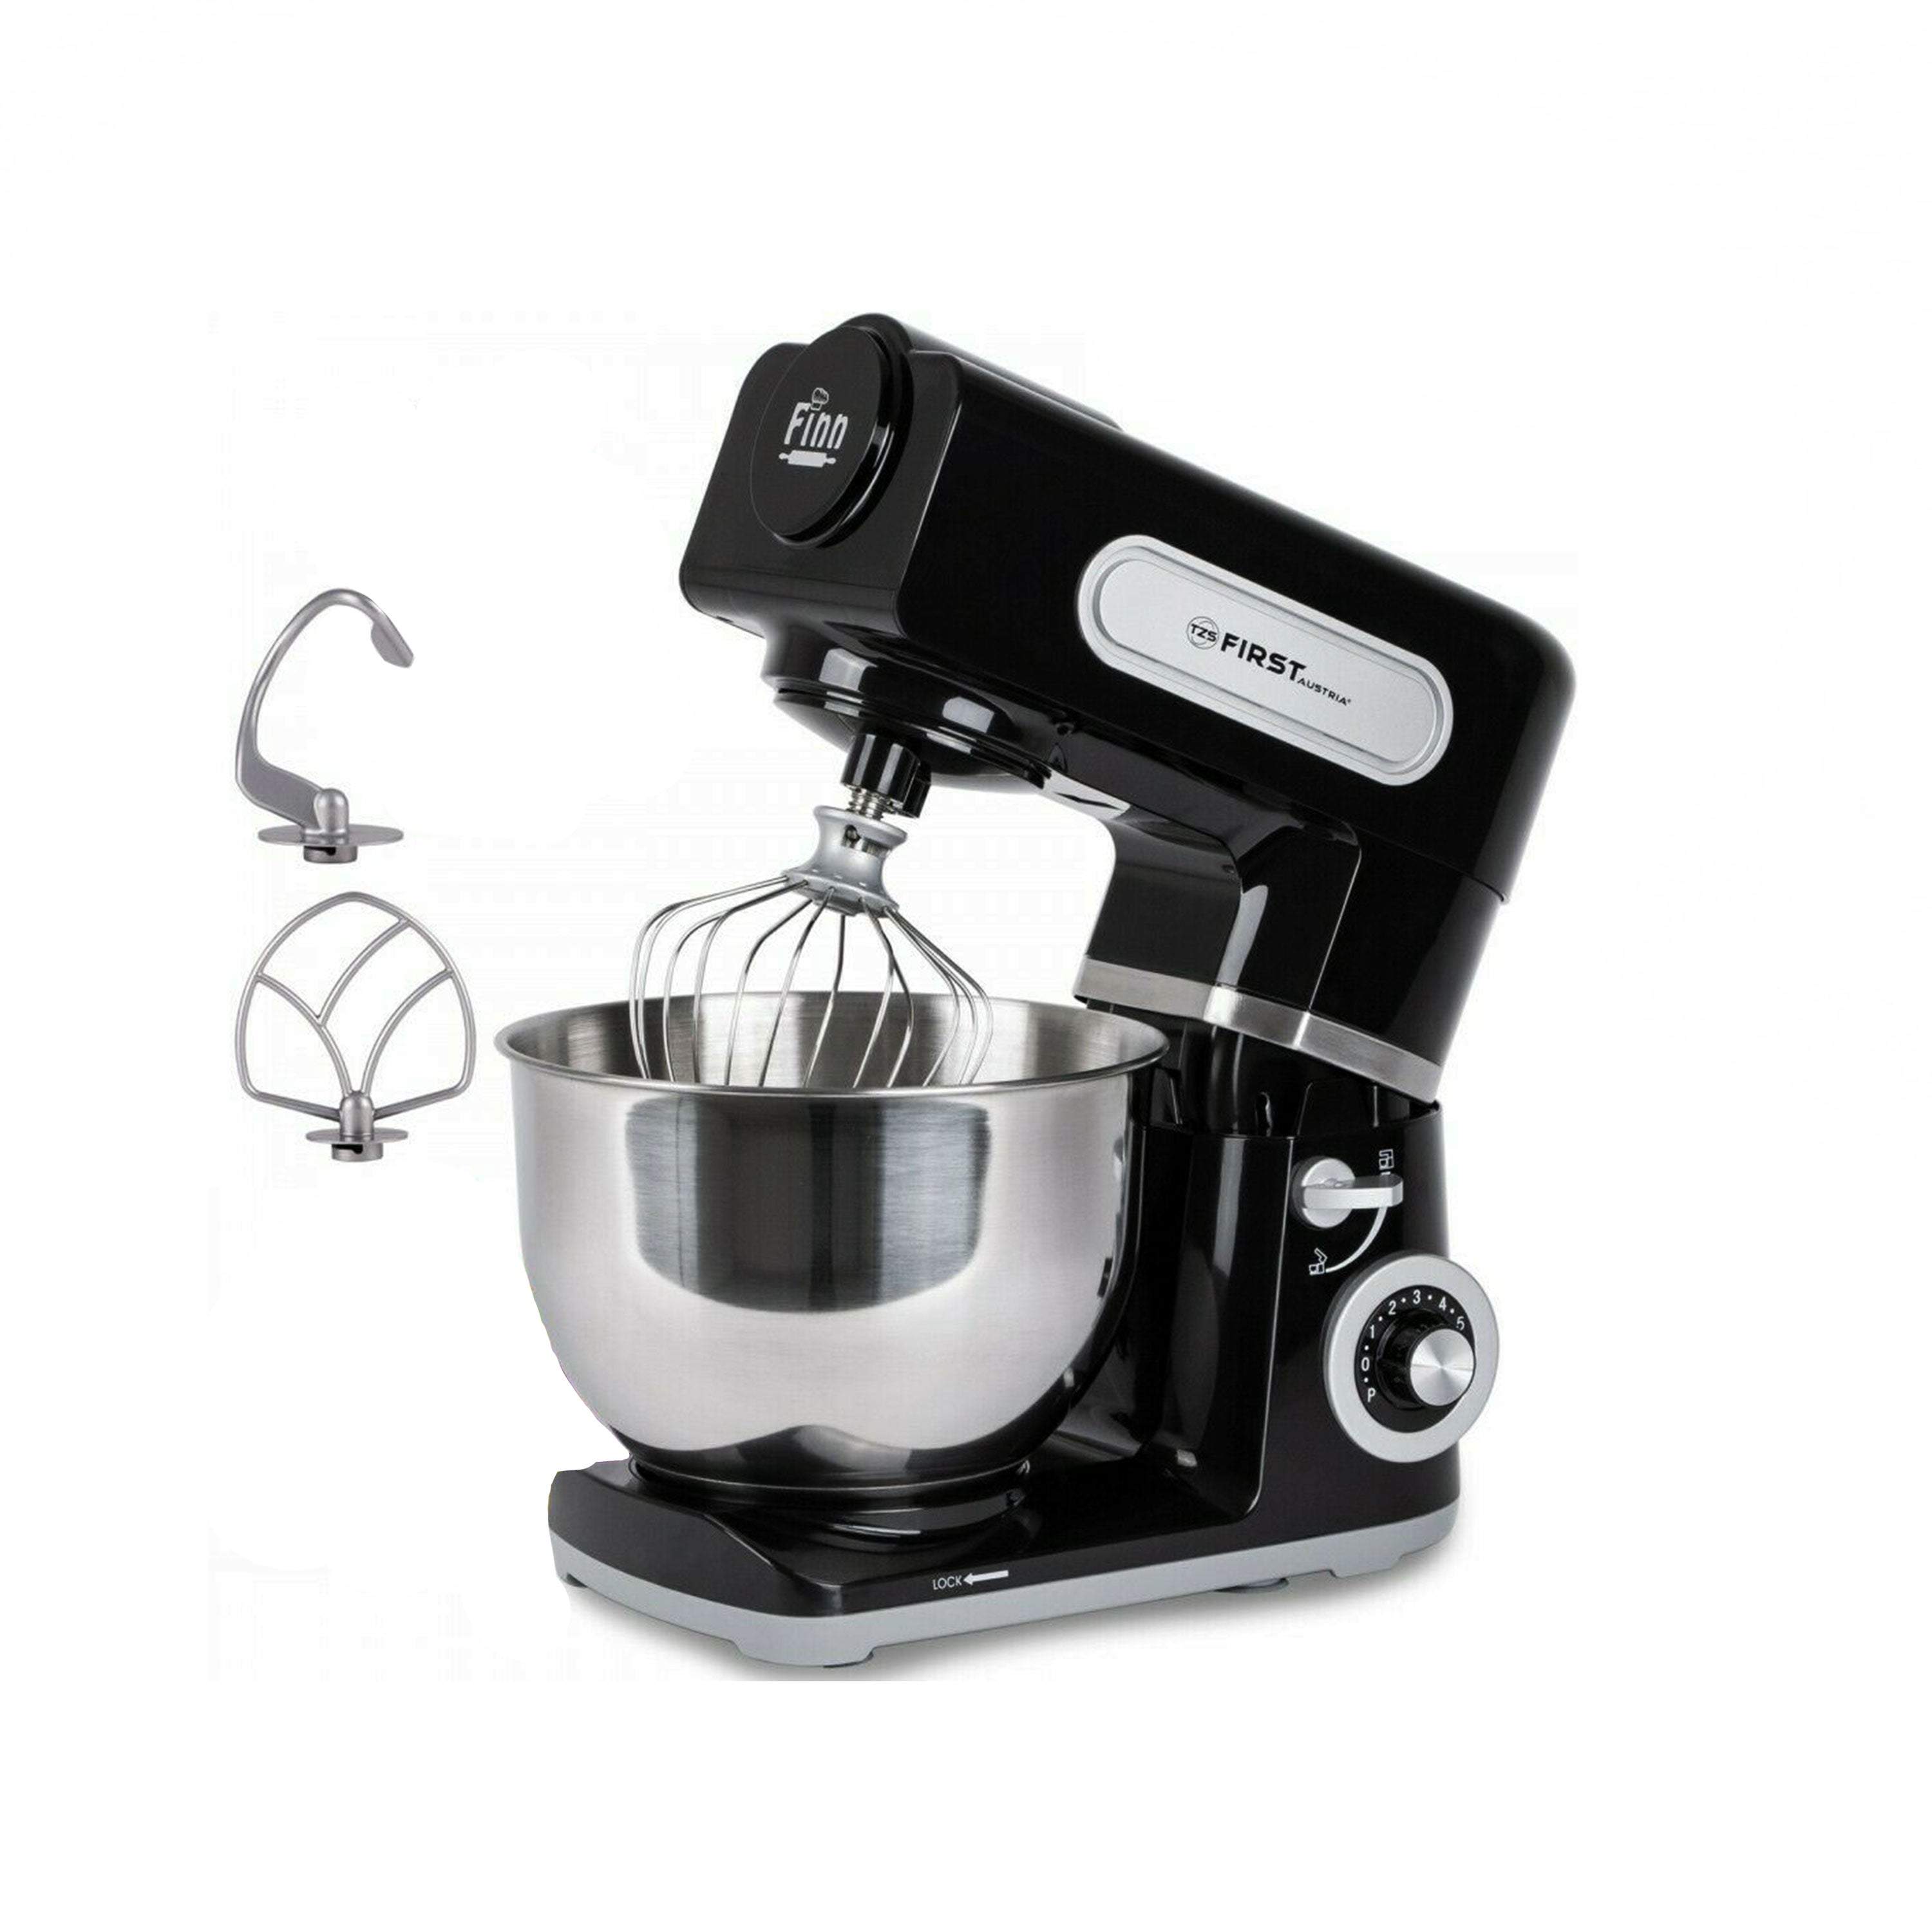 First Austria Dough Stand Mixer 1500W | 6L Stainless Steel Bowl-Royal Brands Co-